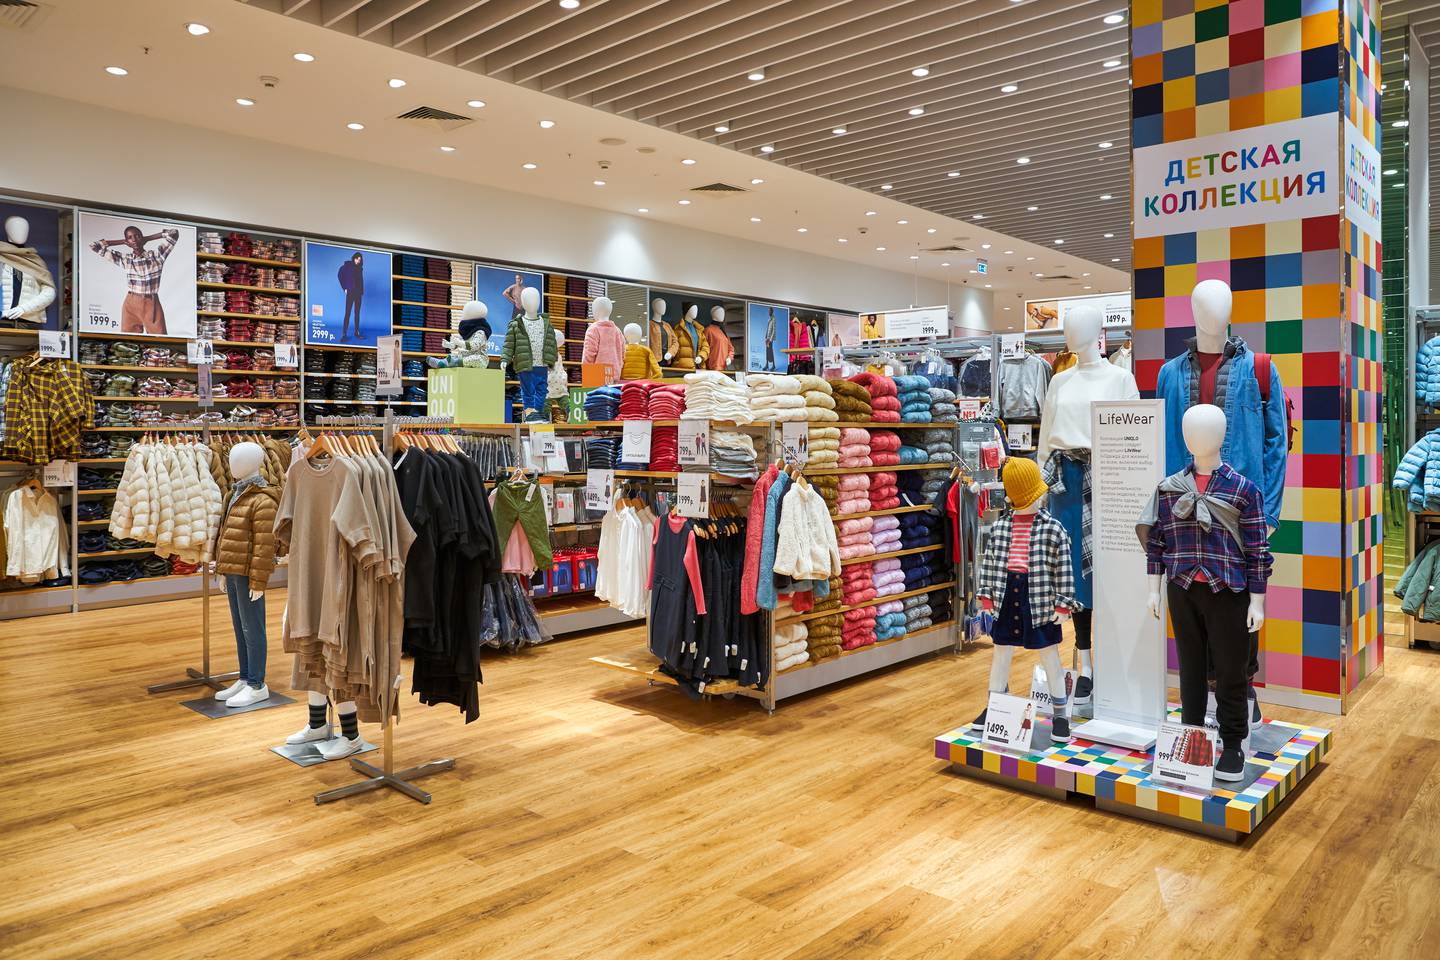 The interior of a Uniqlo store at Salaris shopping mall in Moscow.